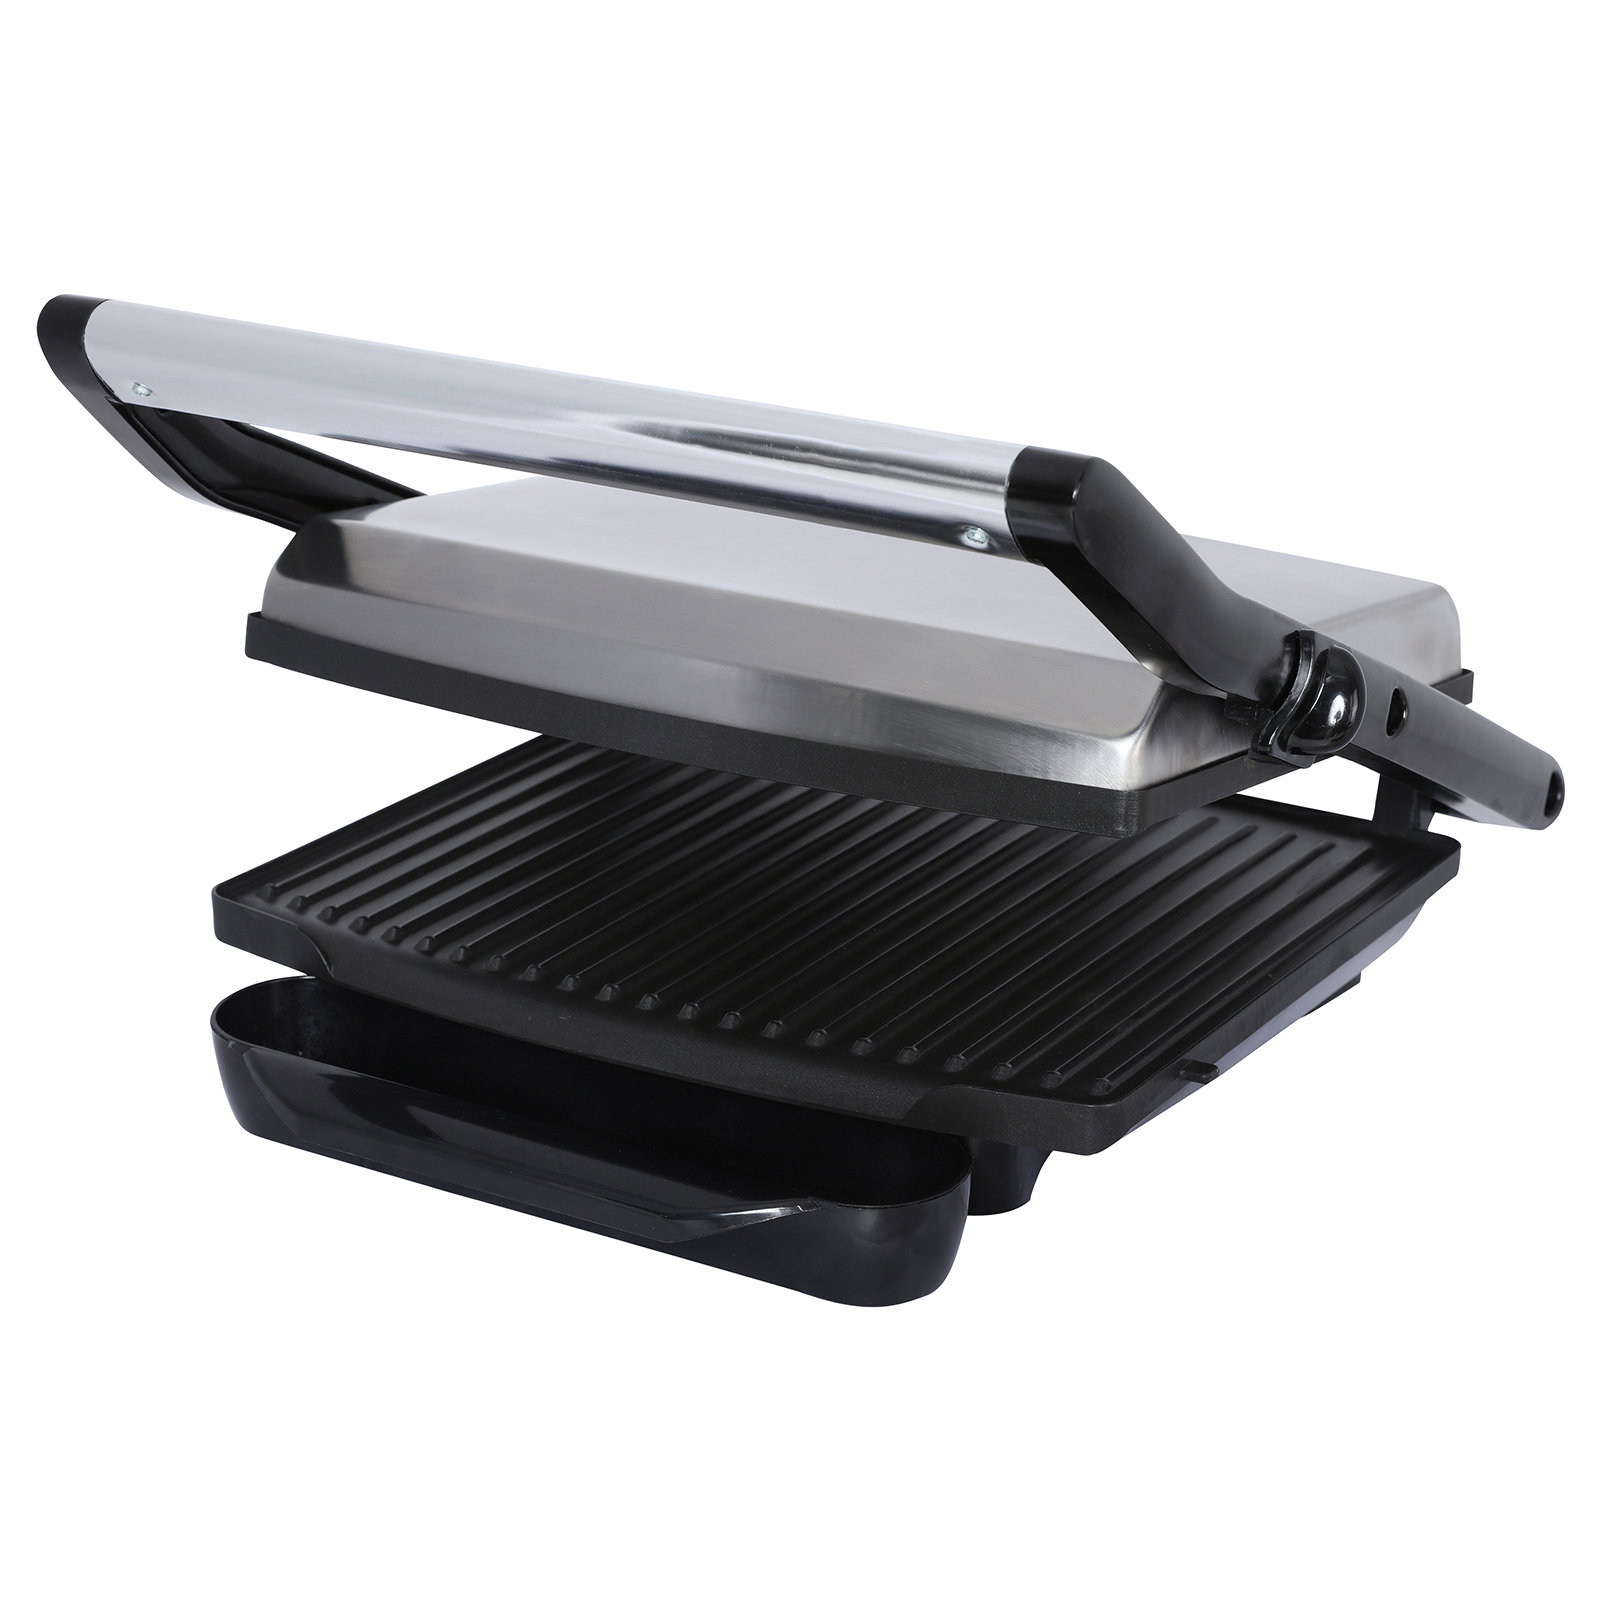 Brentwood Compact Non-Stick Panini Press & Sandwich Maker, Stainless Steel